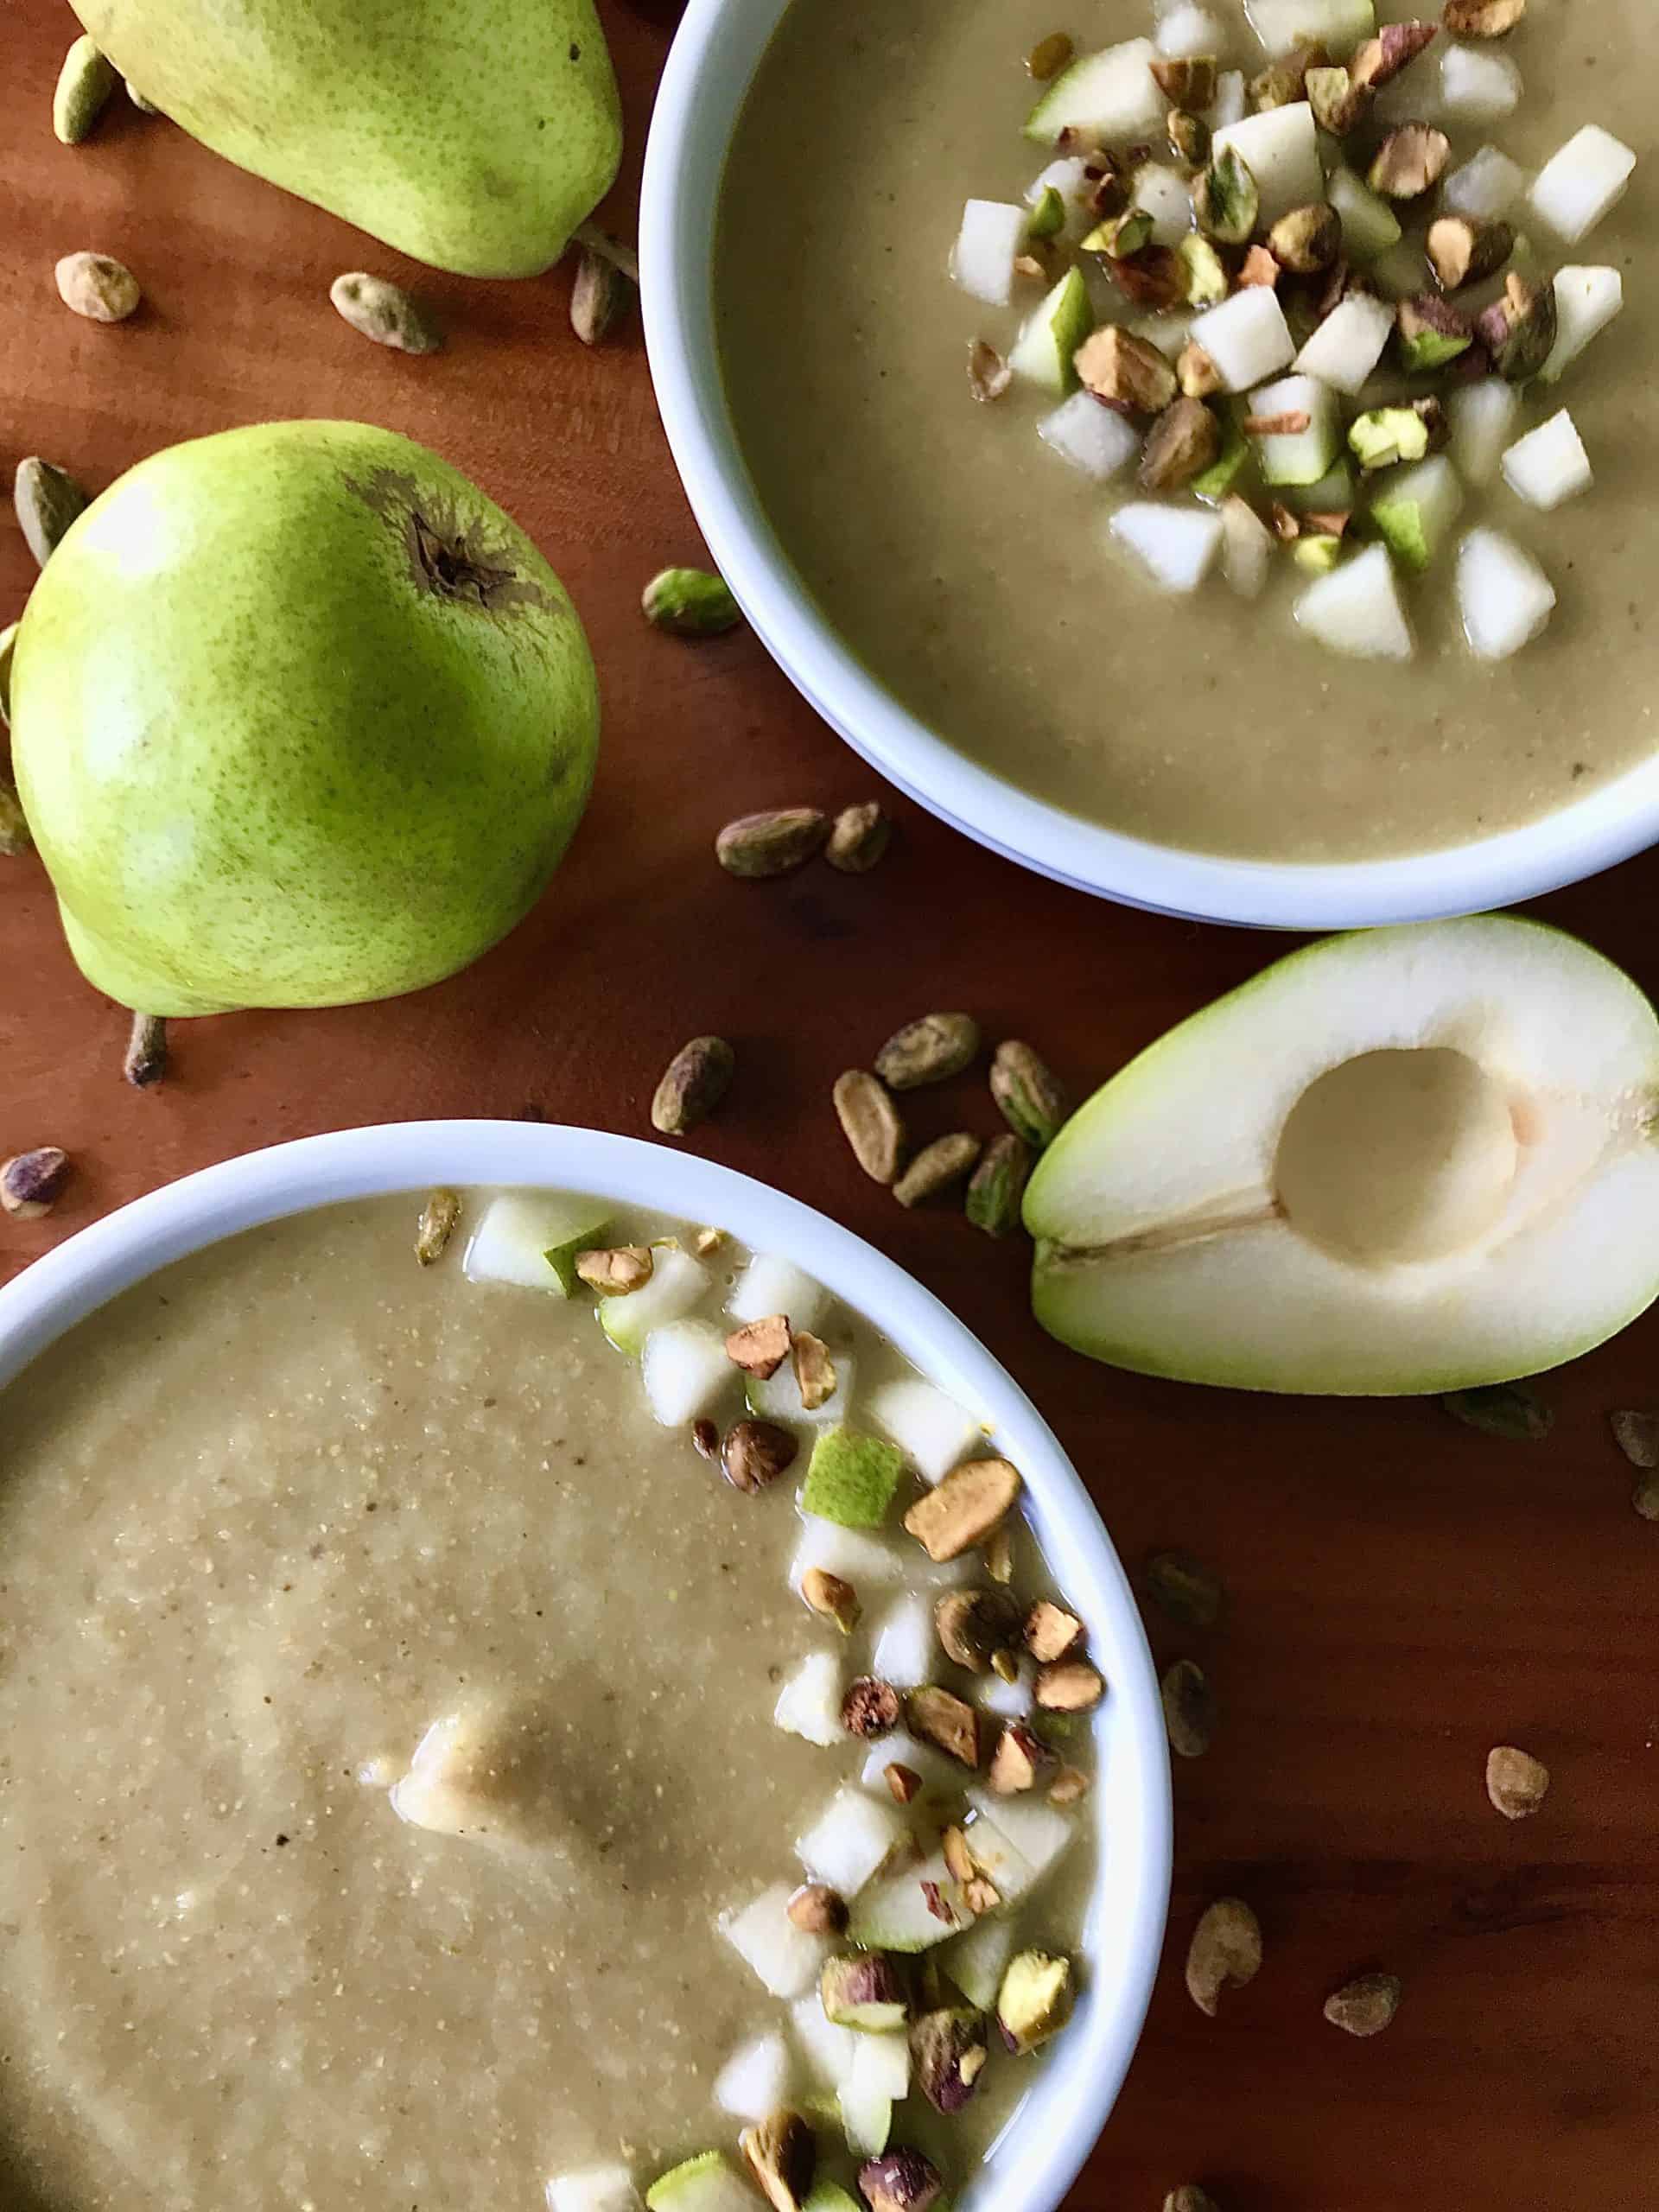 Healthy, creamy parsnip soup with pears and pistachios in white bowls on a wooden table